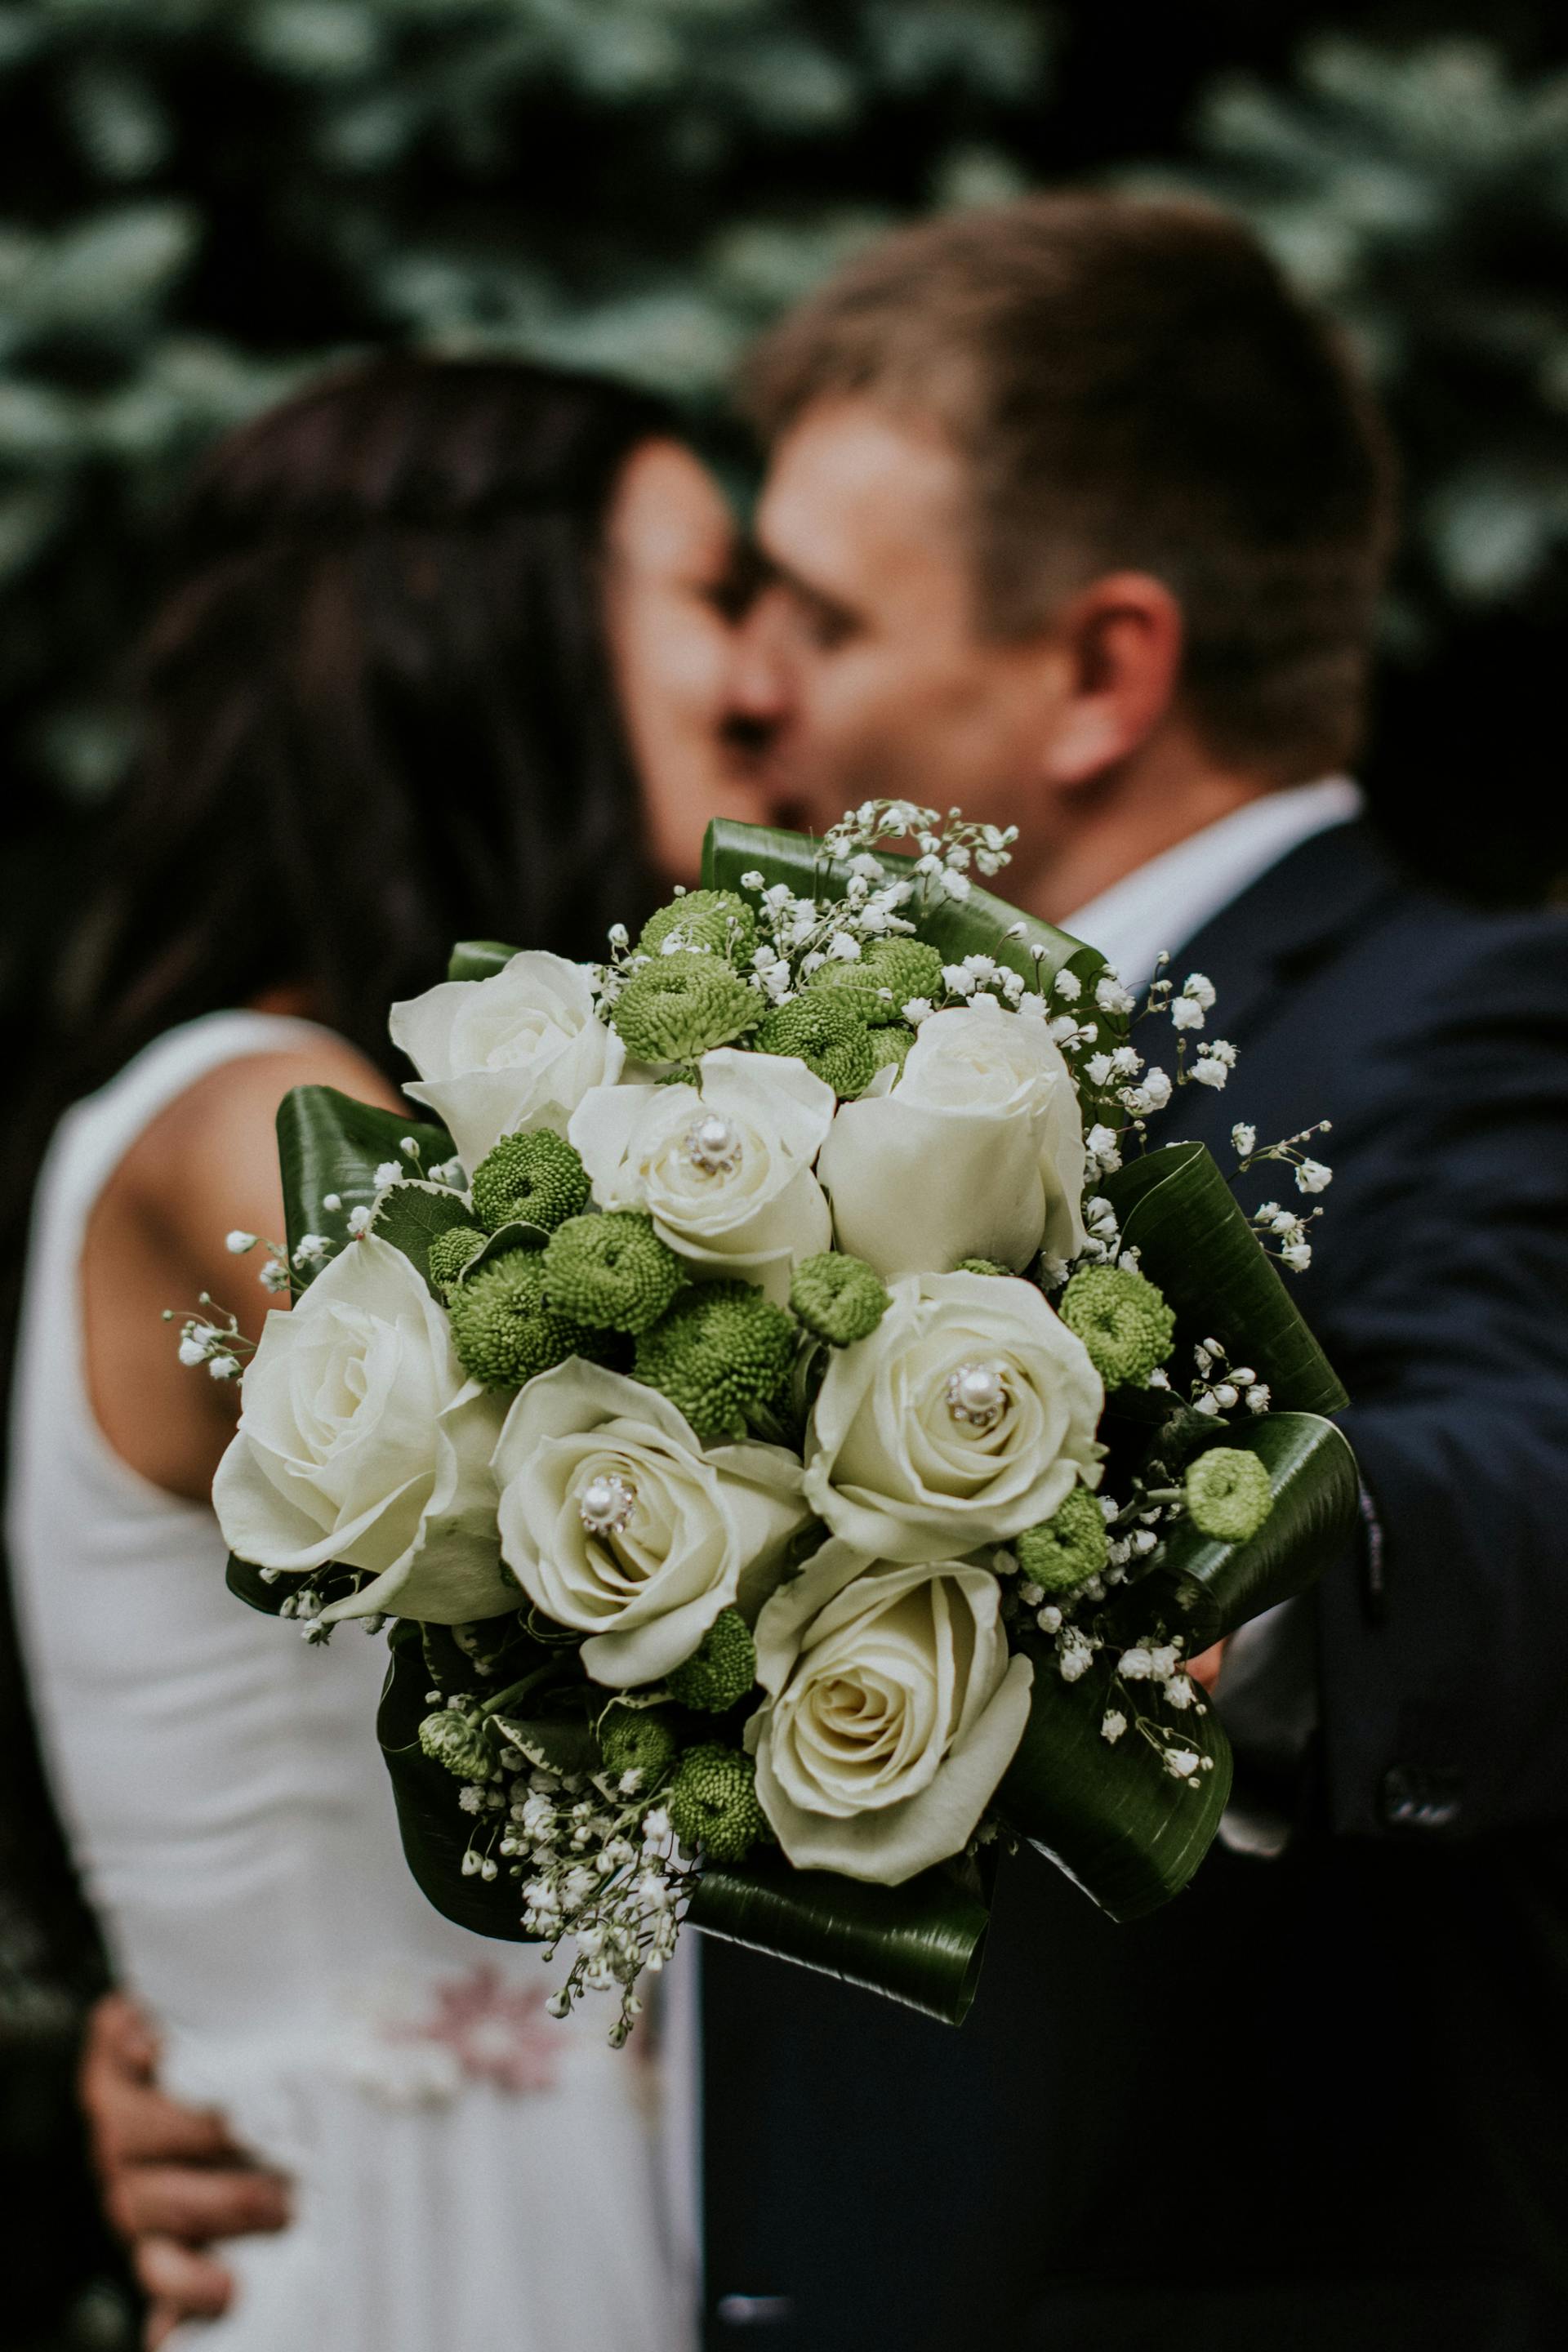 A married couple kissing | Source: Pexels